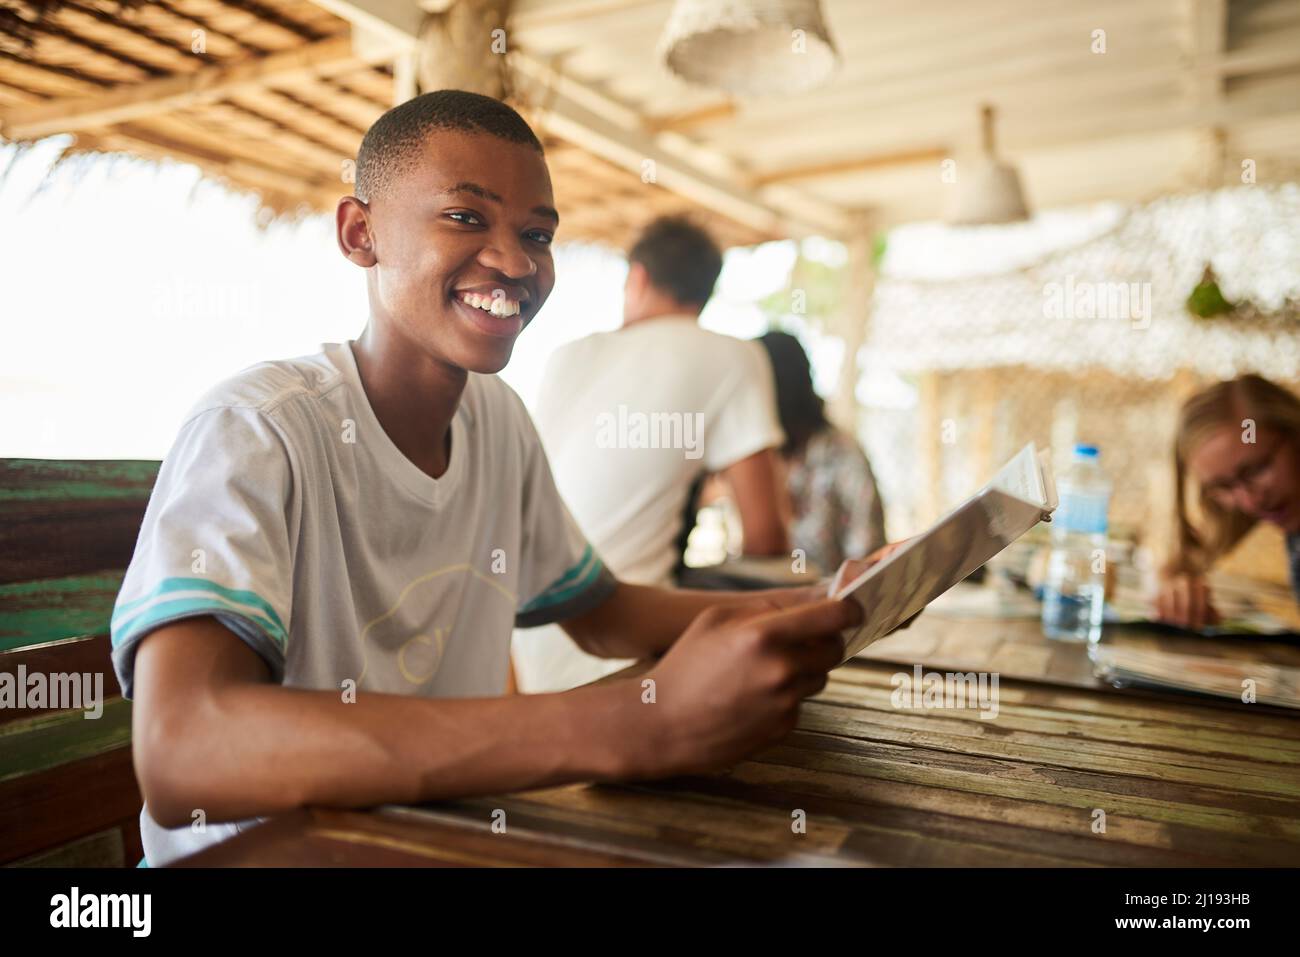 Whats on the menu. Portrait of a young man reading a menu in a restaurant. Stock Photo